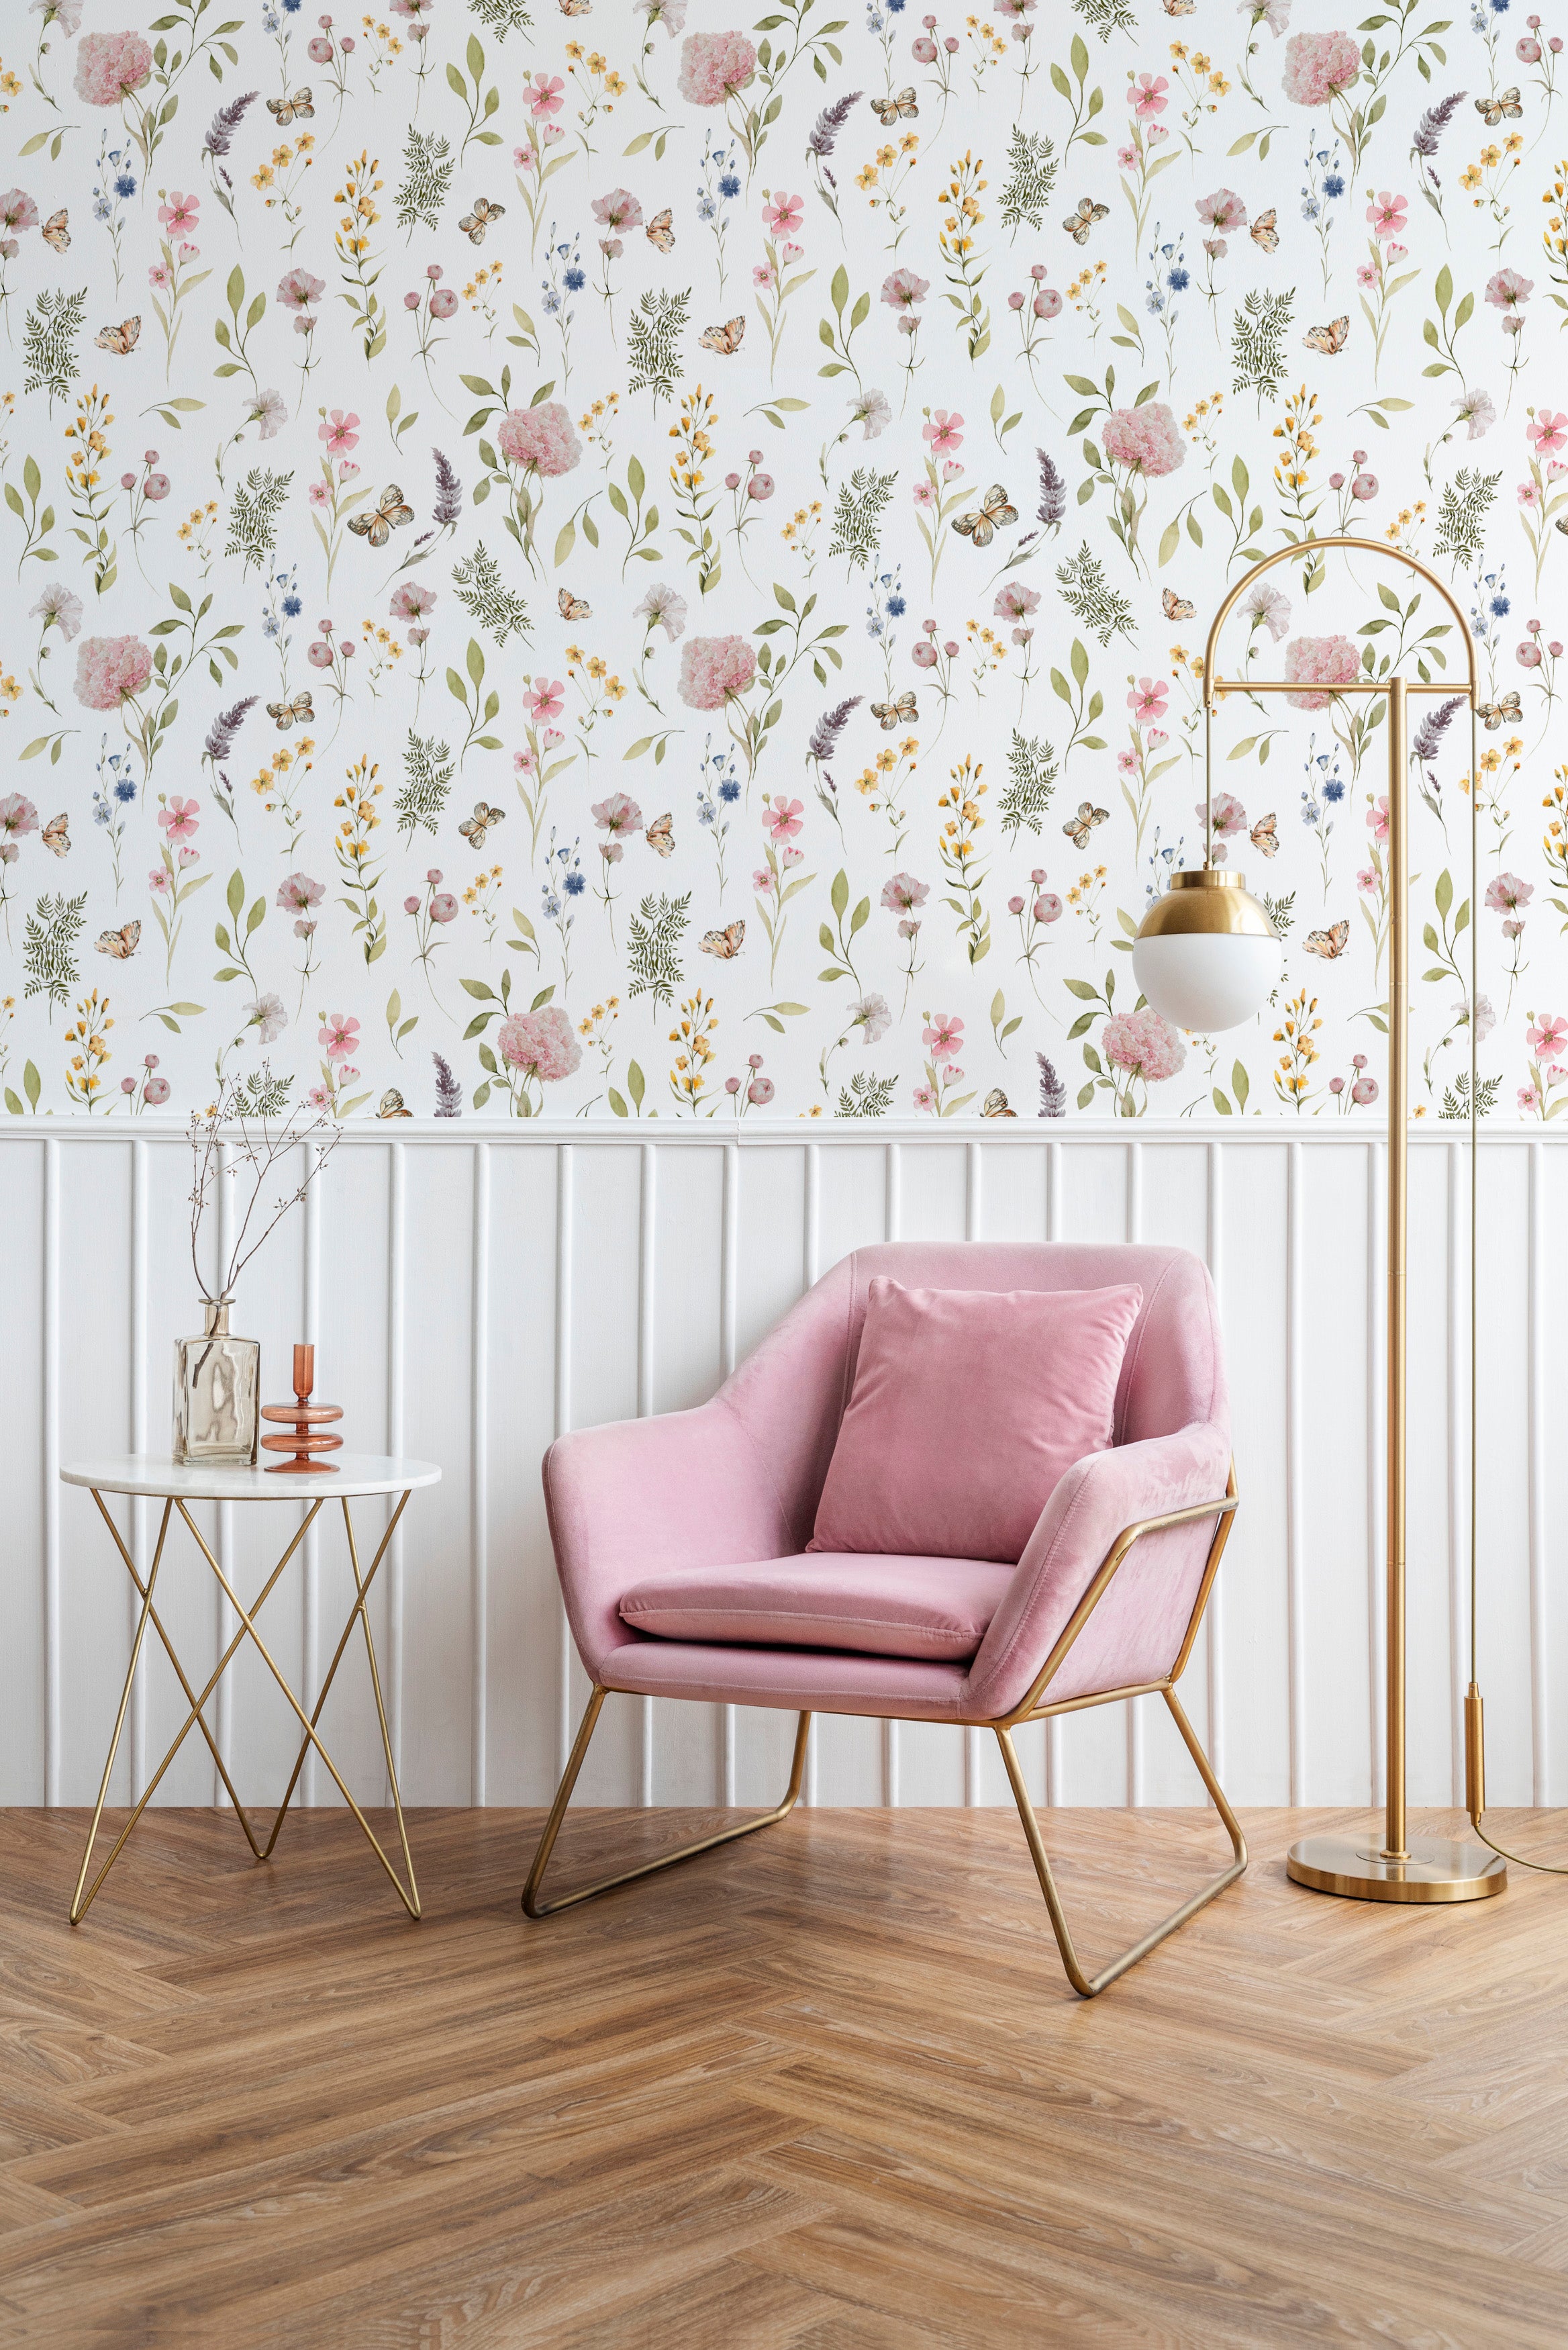 A modern interior featuring the Floral Fields Wallpaper, with its delicate array of wildflowers and butterflies in soft pinks, purples, and yellows, creating a fresh and serene ambiance. A plush pink armchair with gold accents, a white side table, and a stylish gold floor lamp complement the wall's floral design.